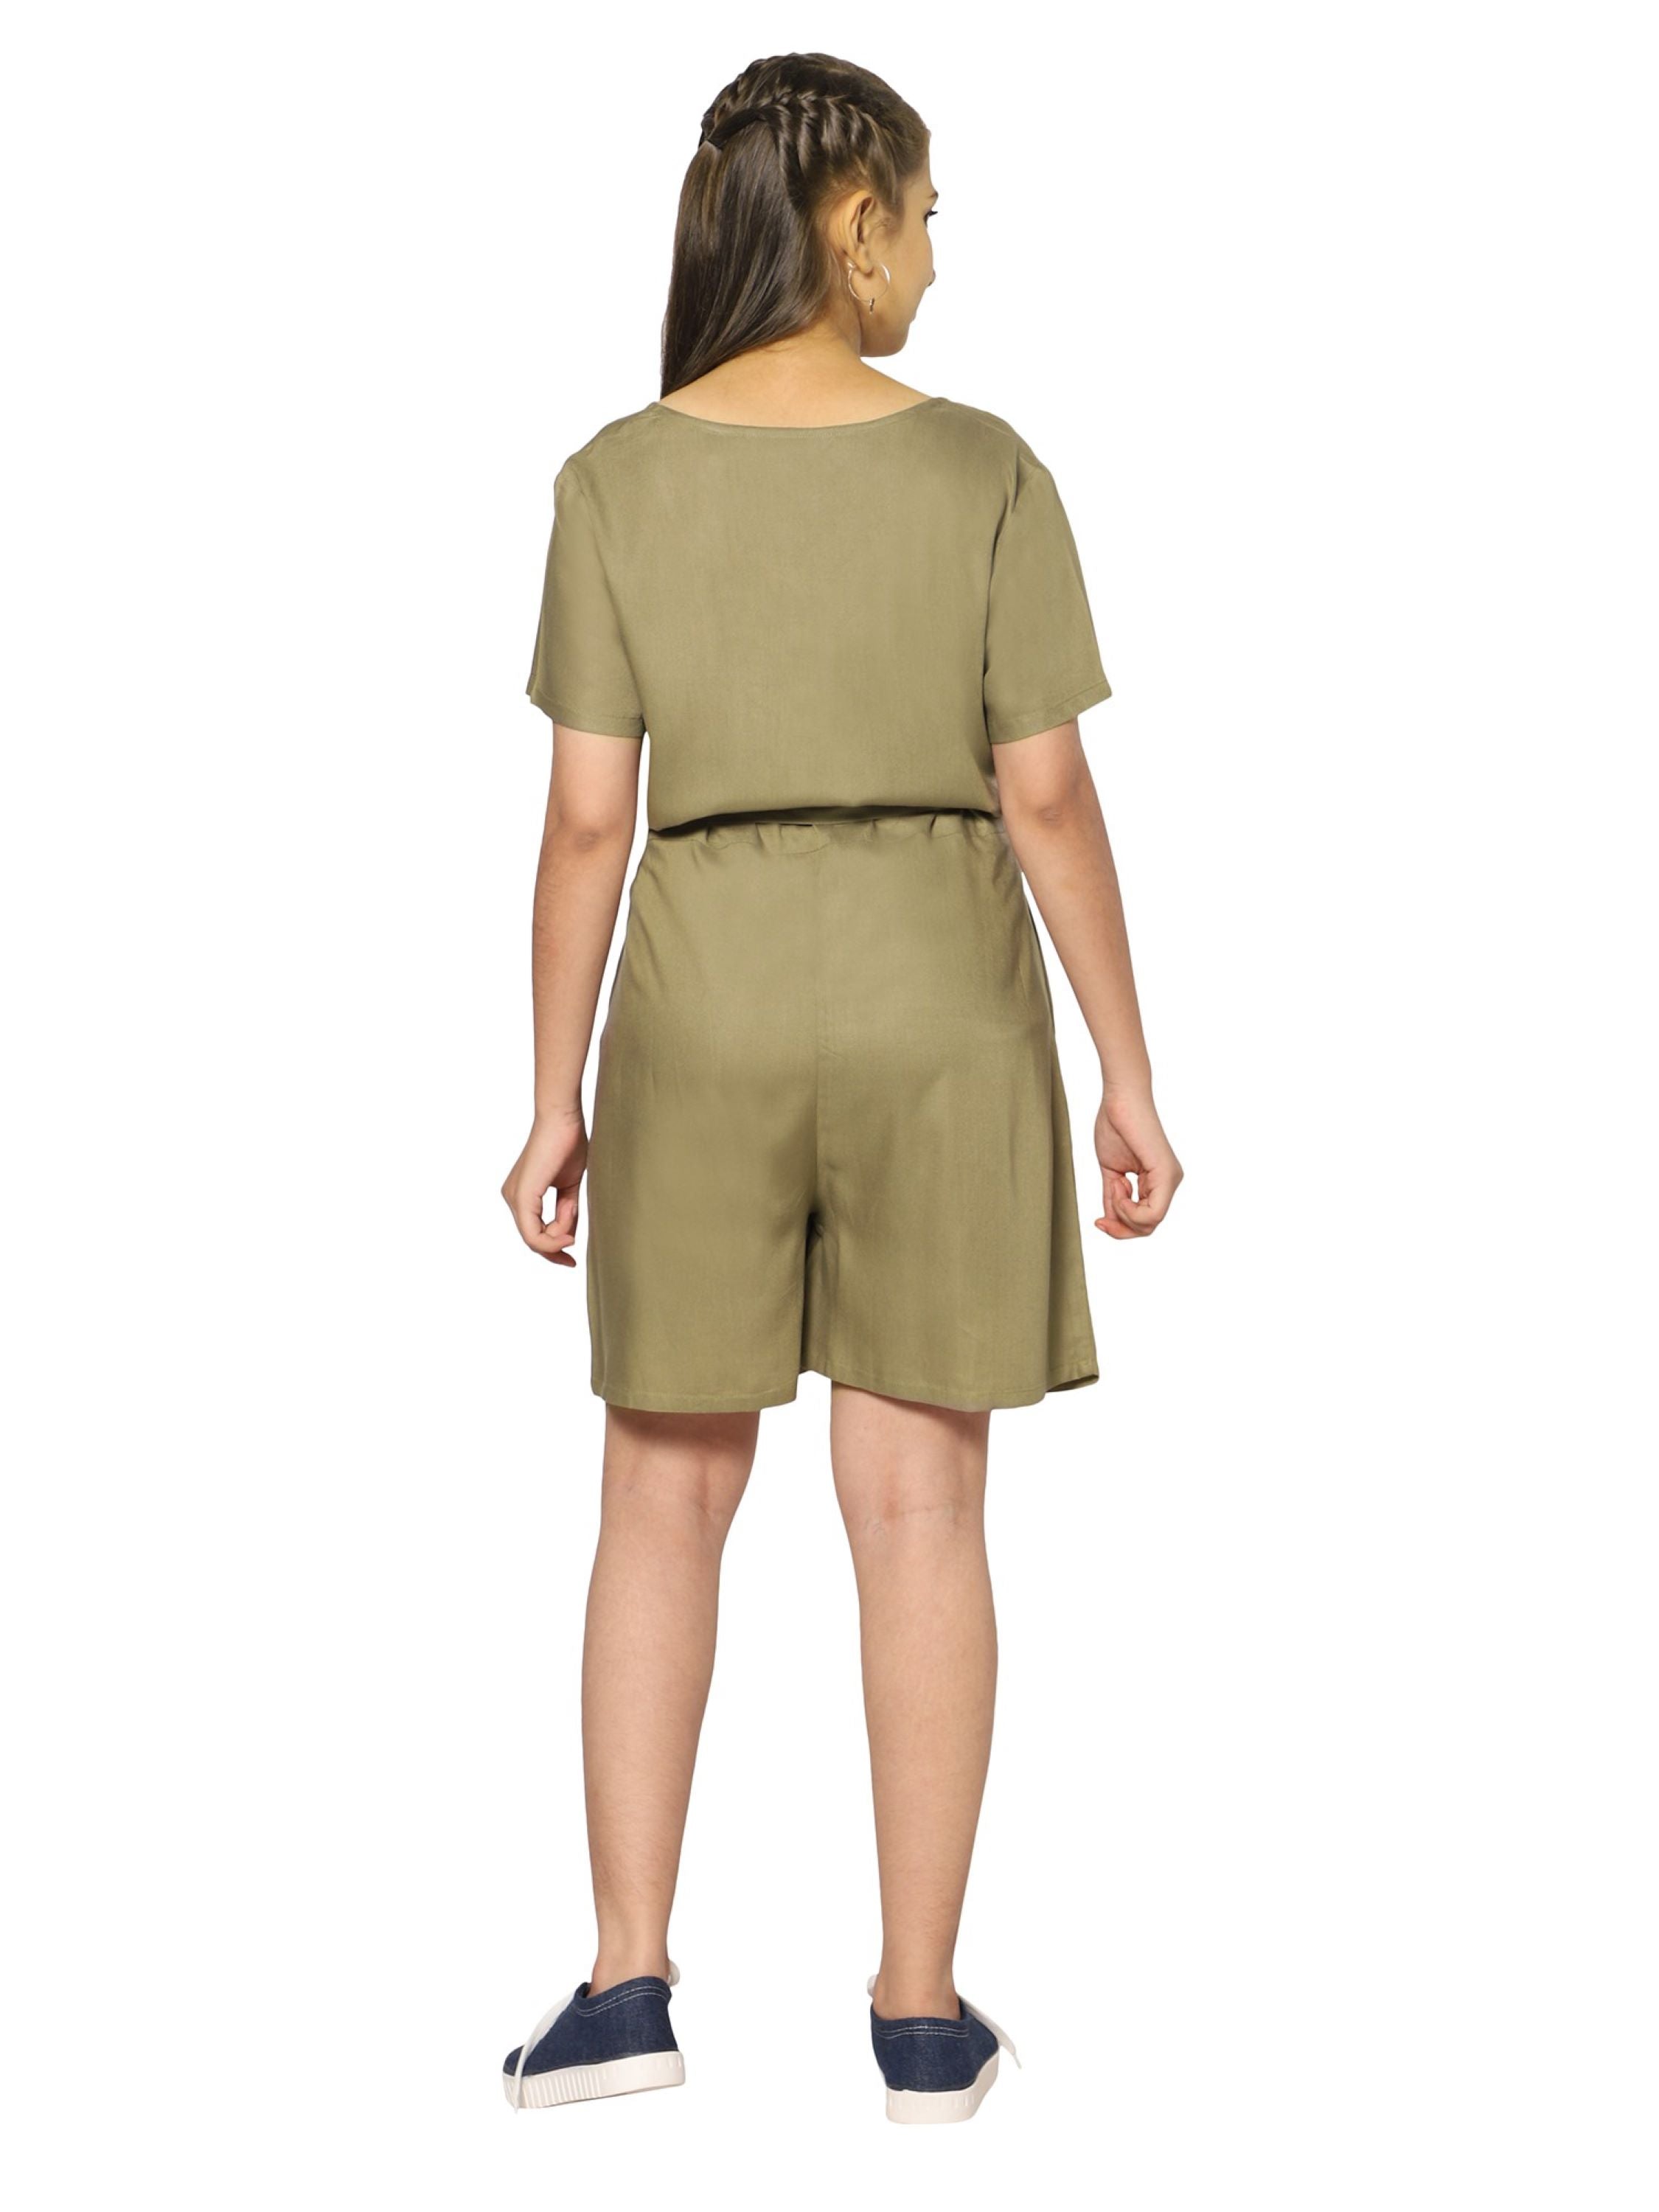 TeenTrums Girls Rayon Play Suit-Olive